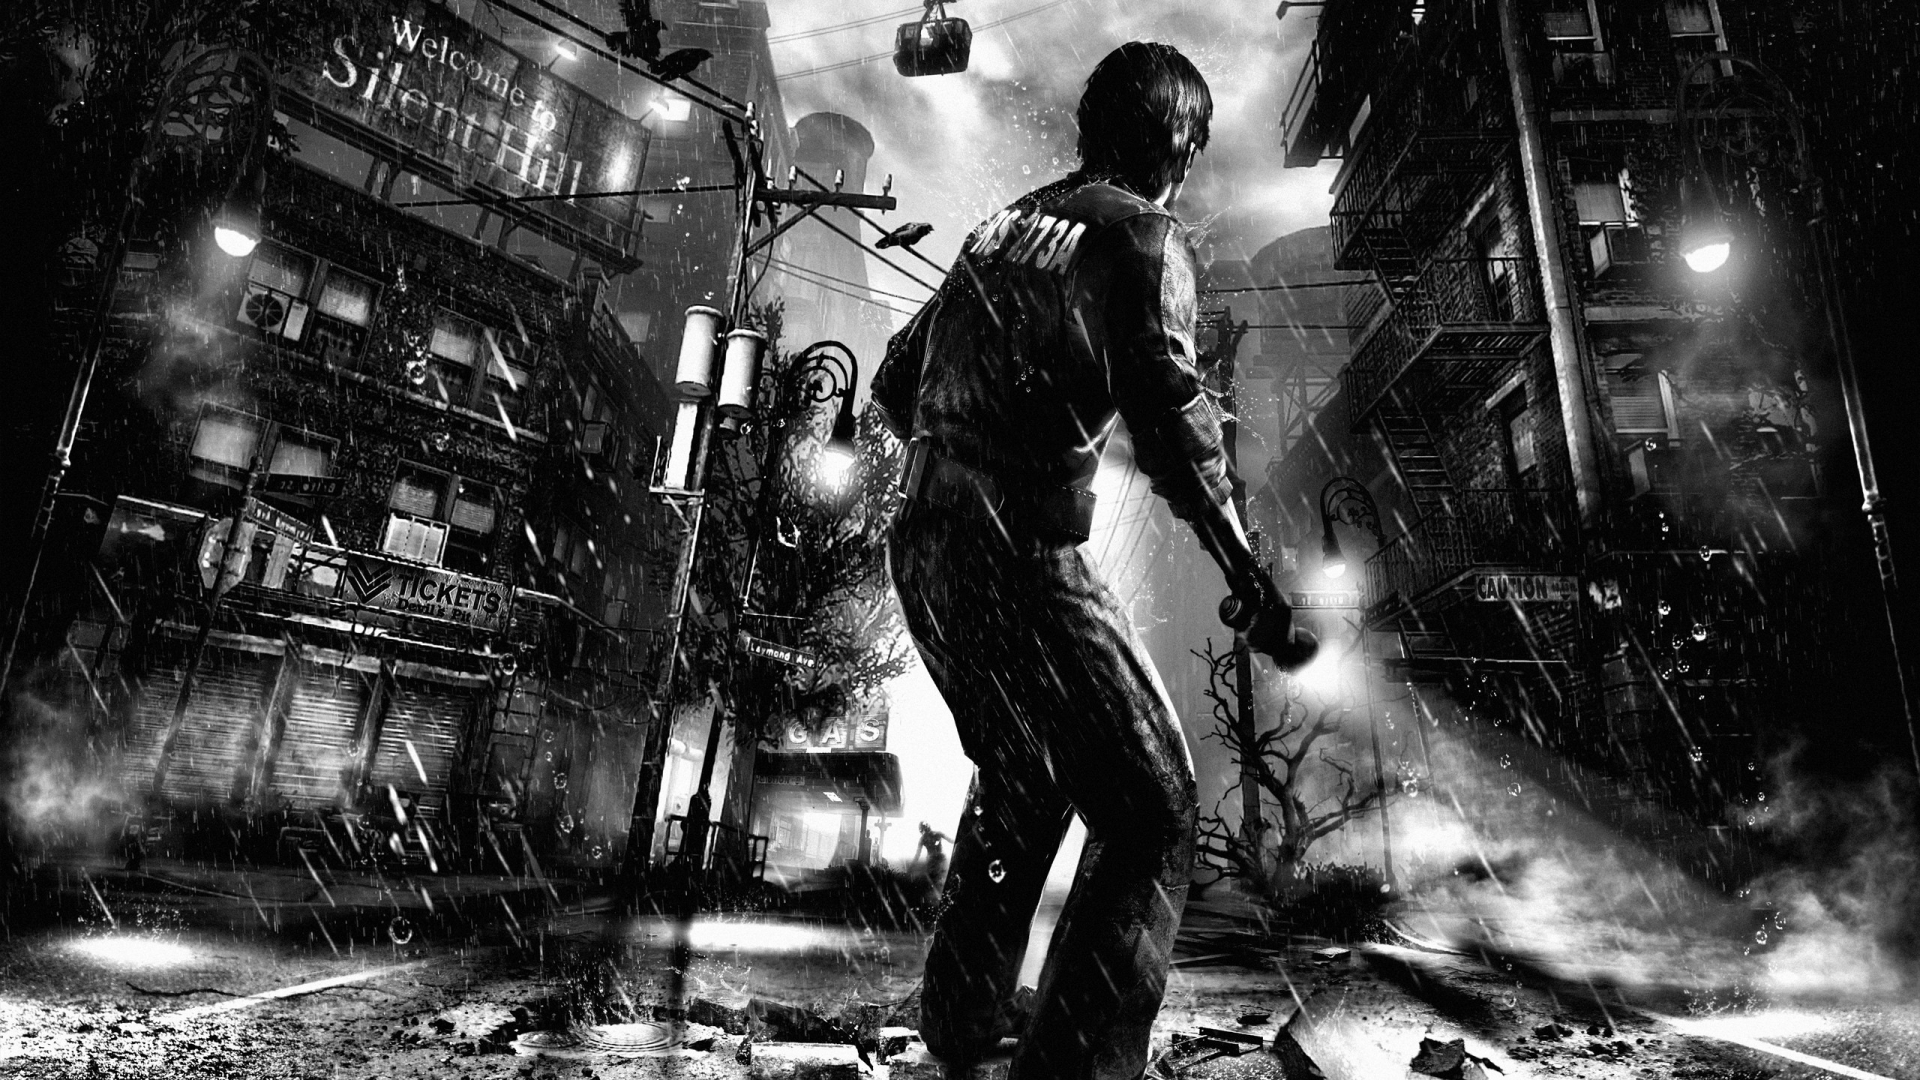 Silent Hill Downpour for 1920 x 1080 HDTV 1080p resolution